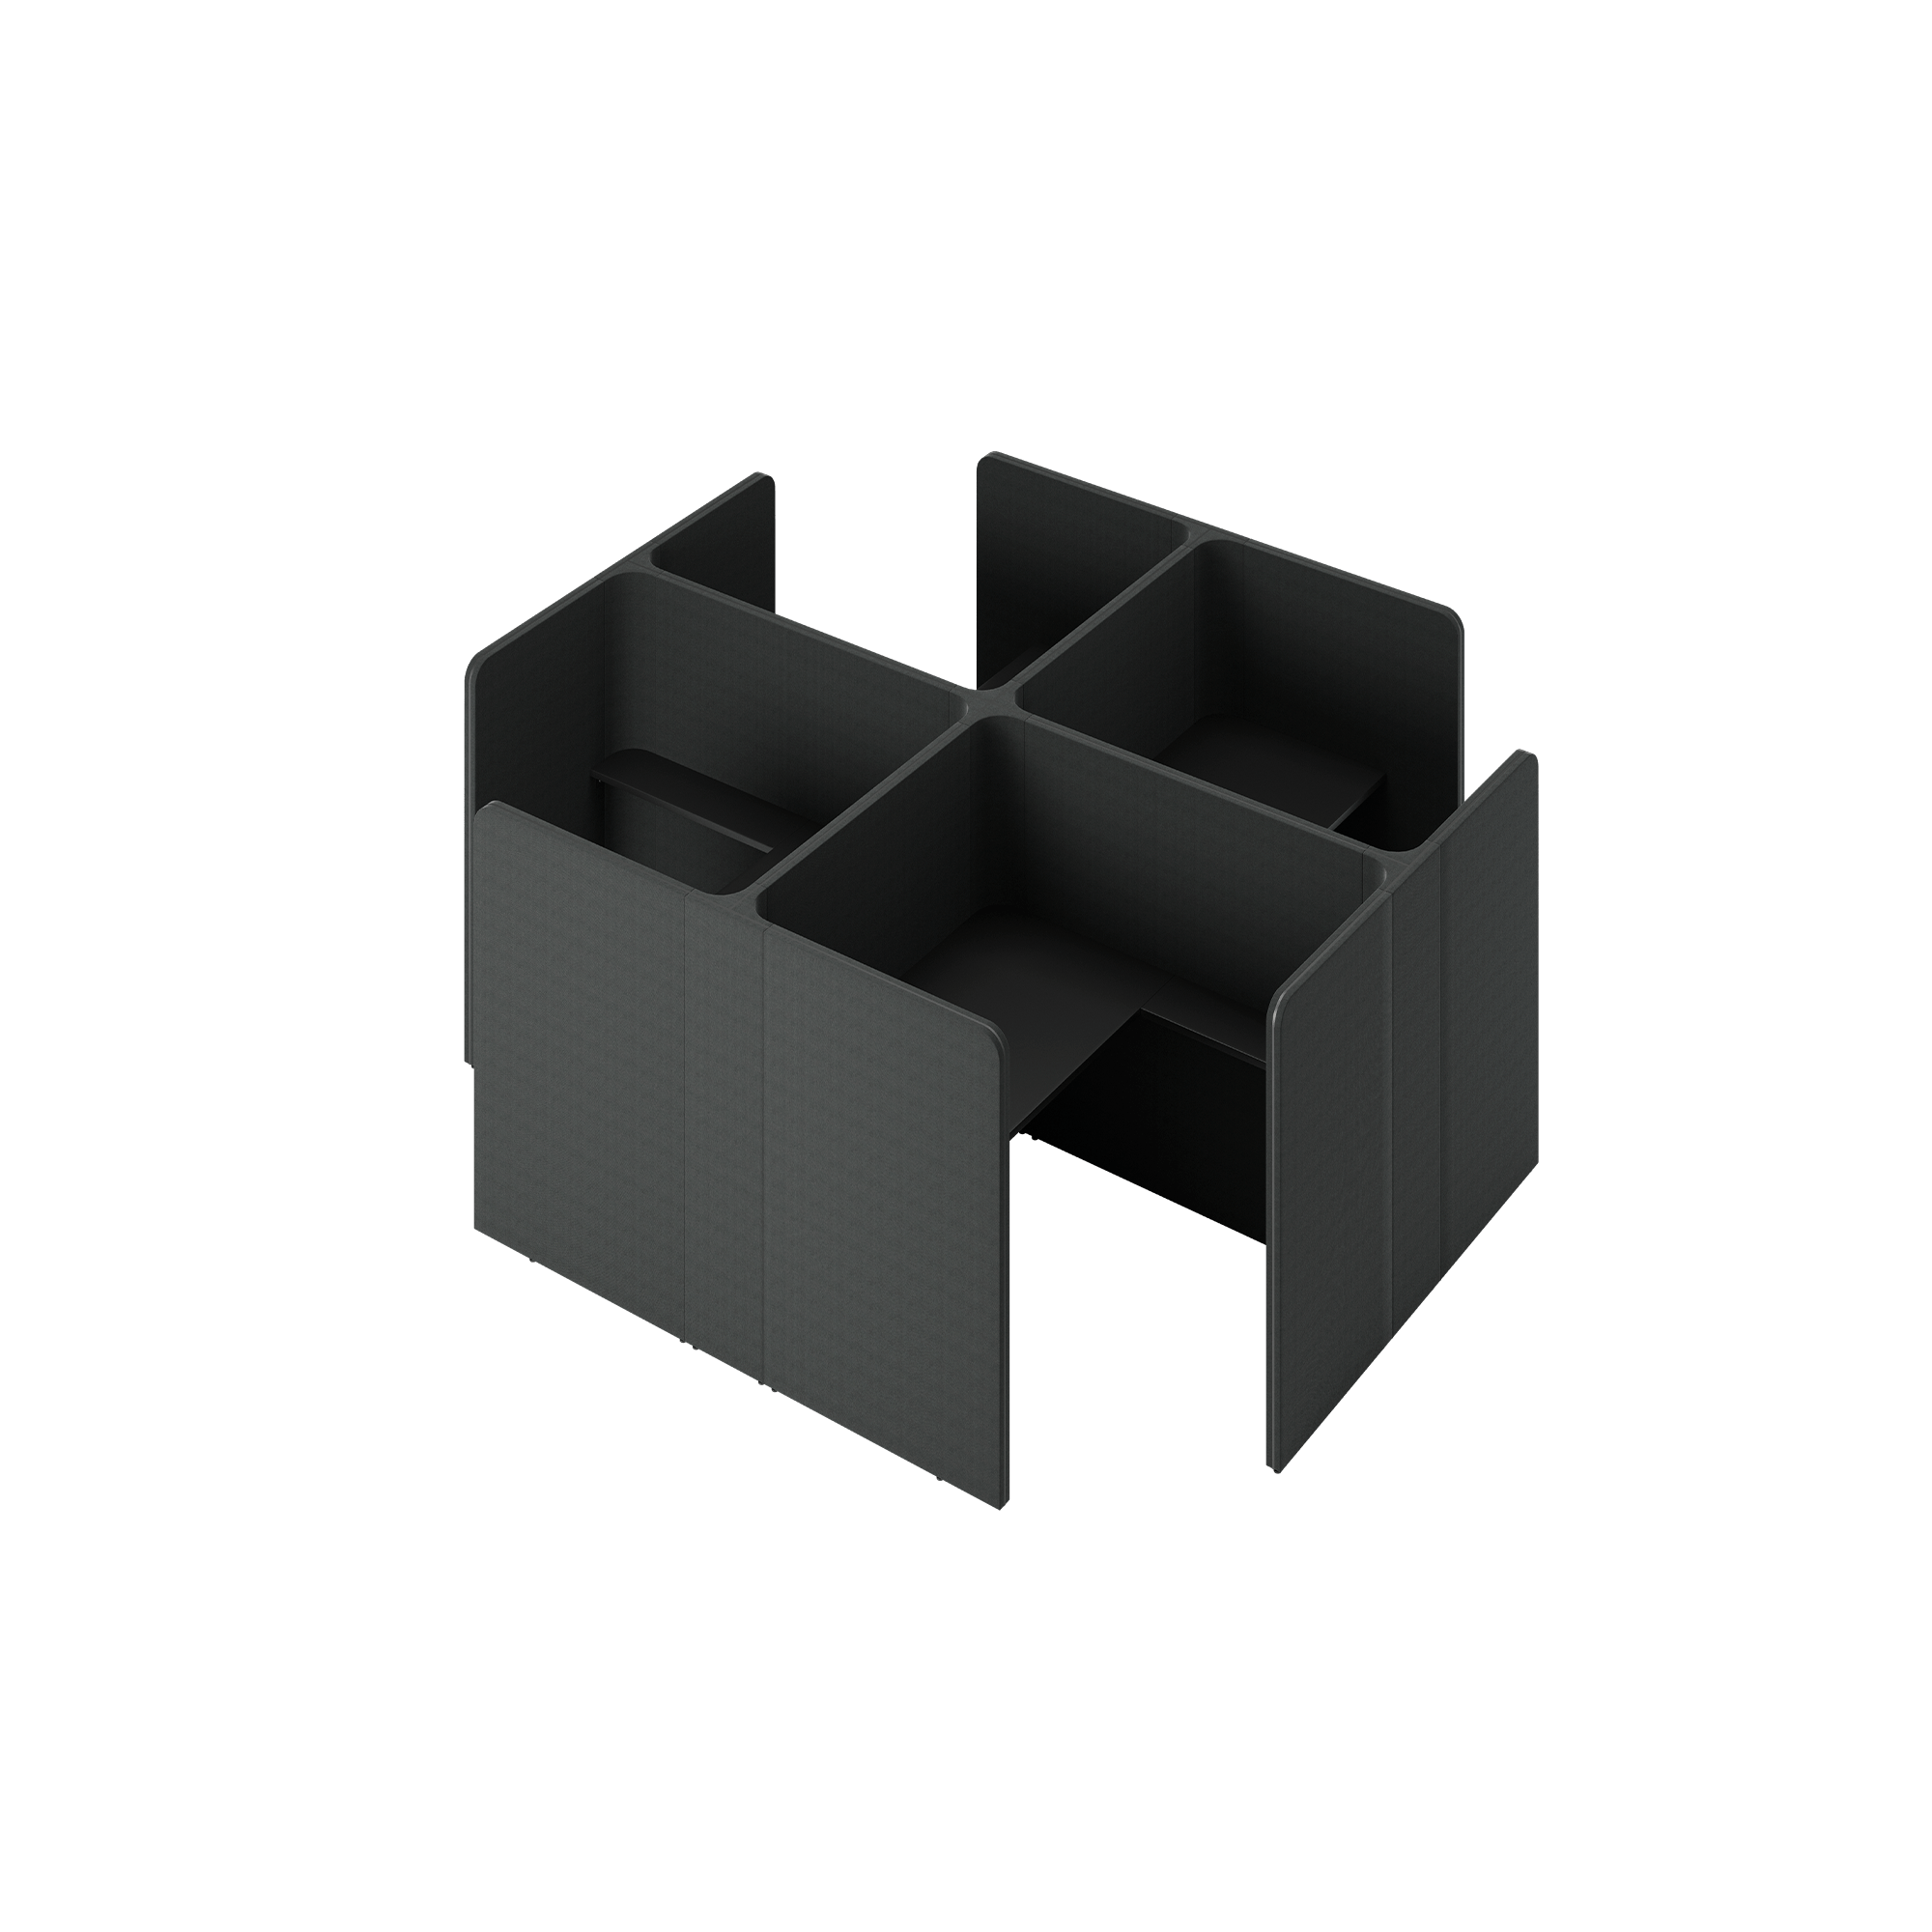 A black study booth with four compartments